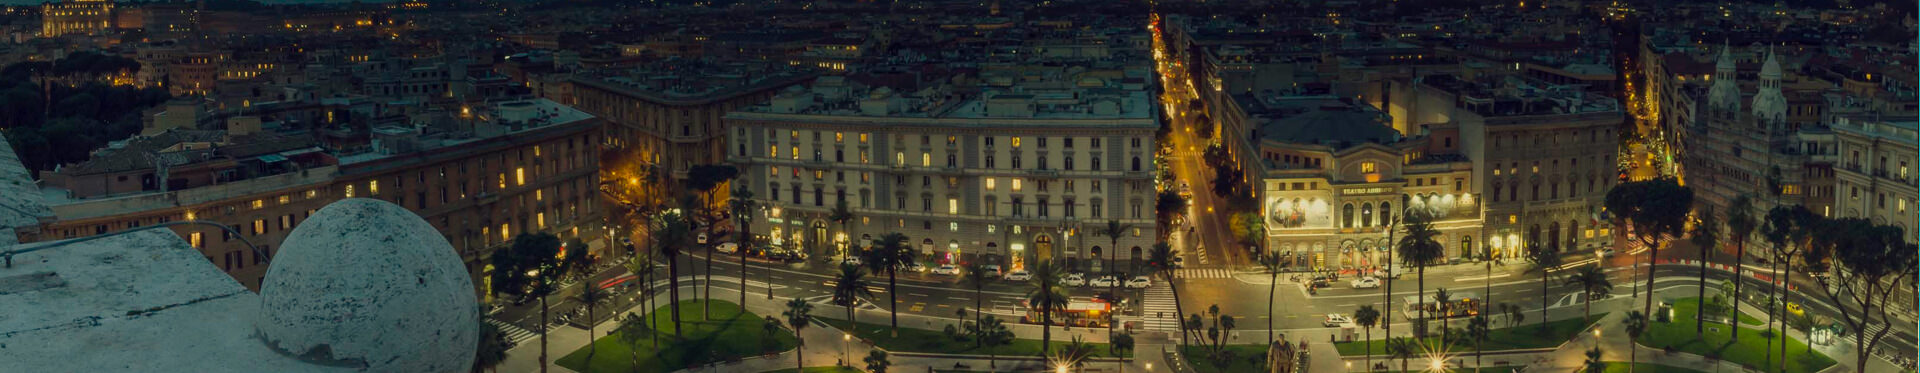 Acea contacts public lighting in Rome and free phone number